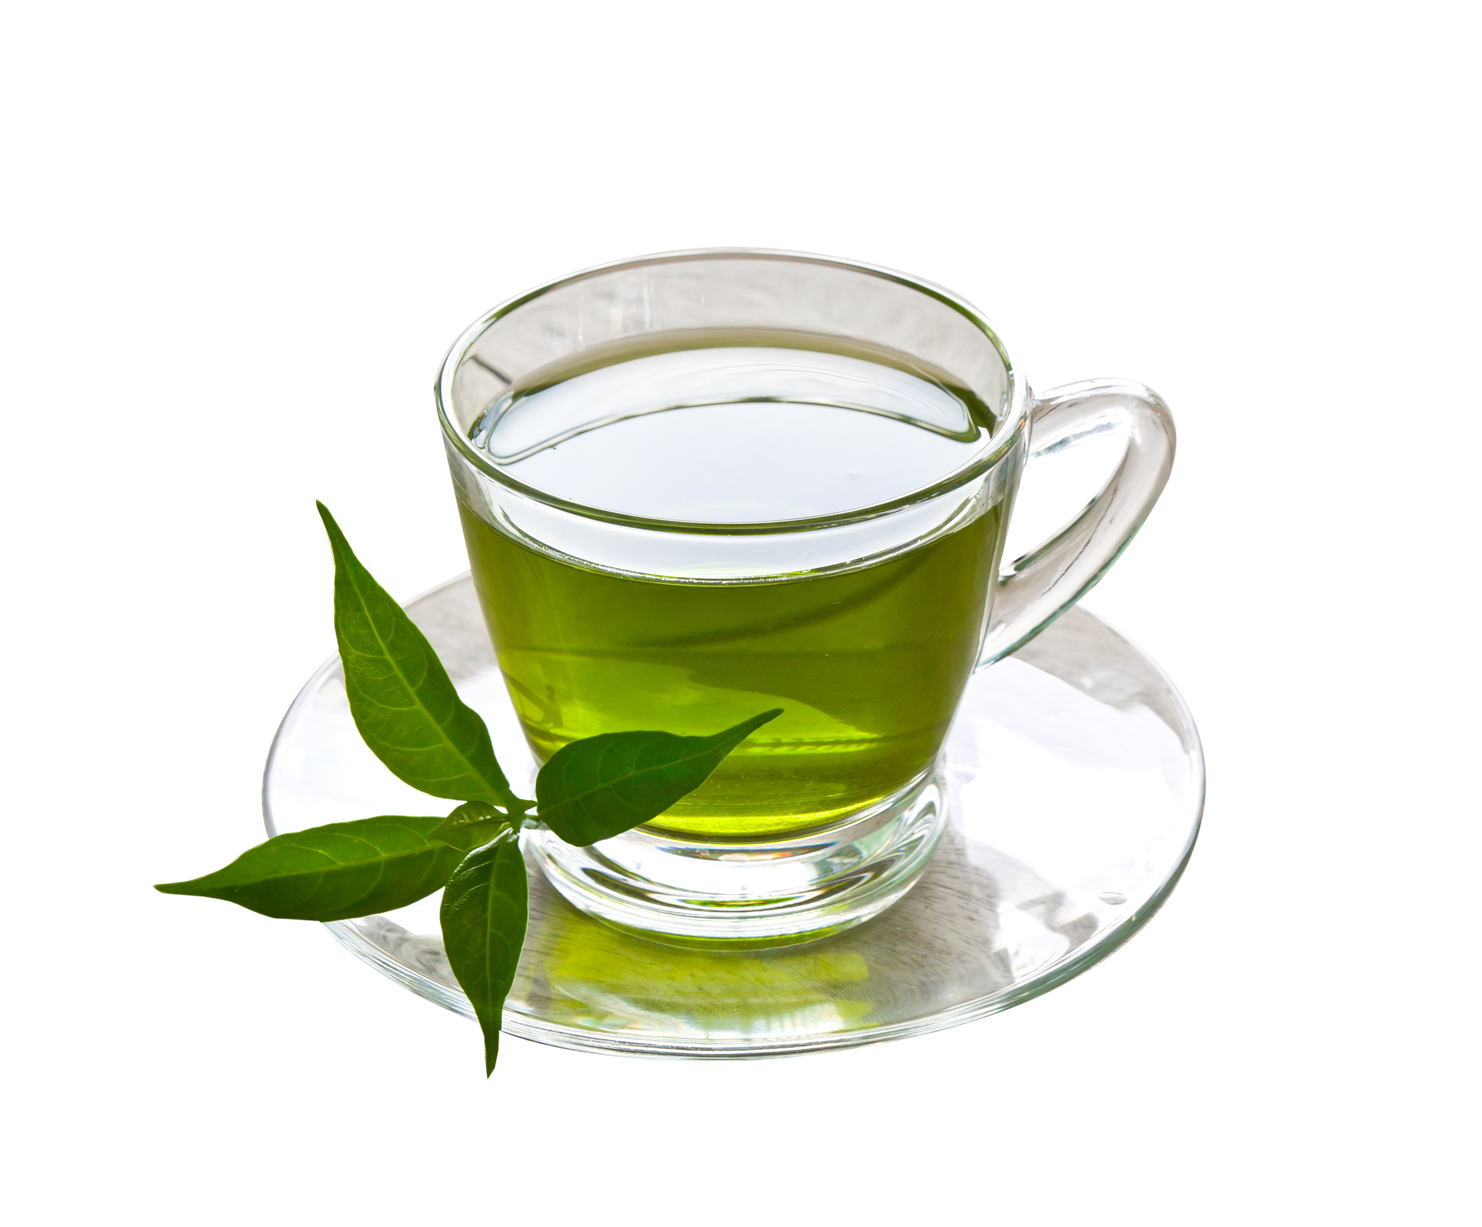 Cup of Green Tea PNG HD Images